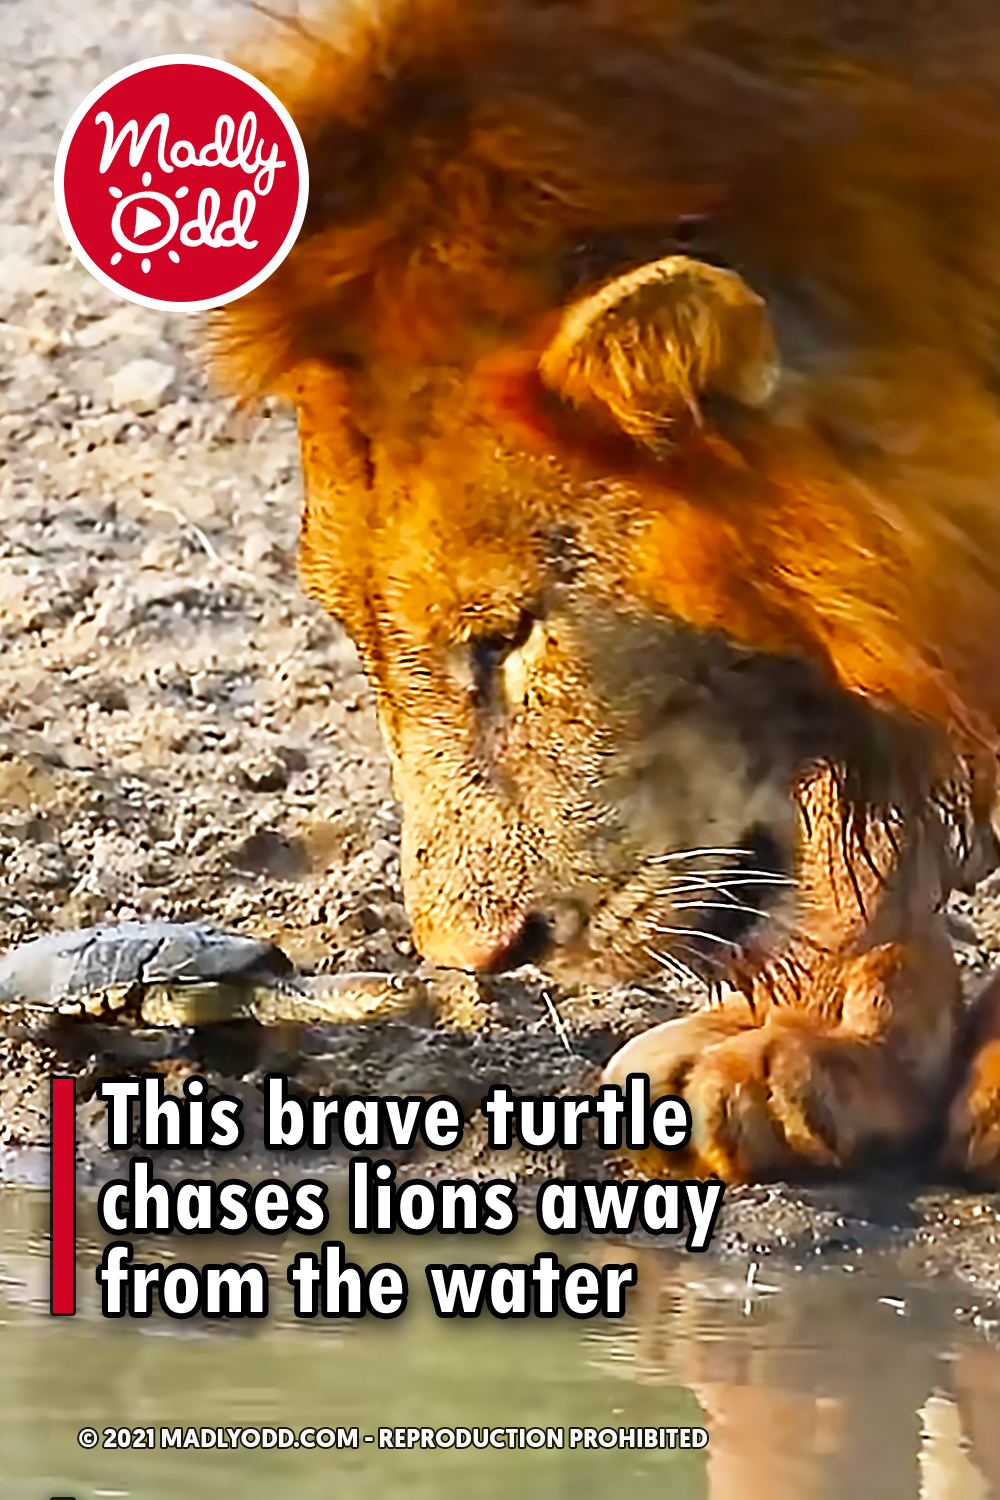 This brave turtle chases lions away from the water